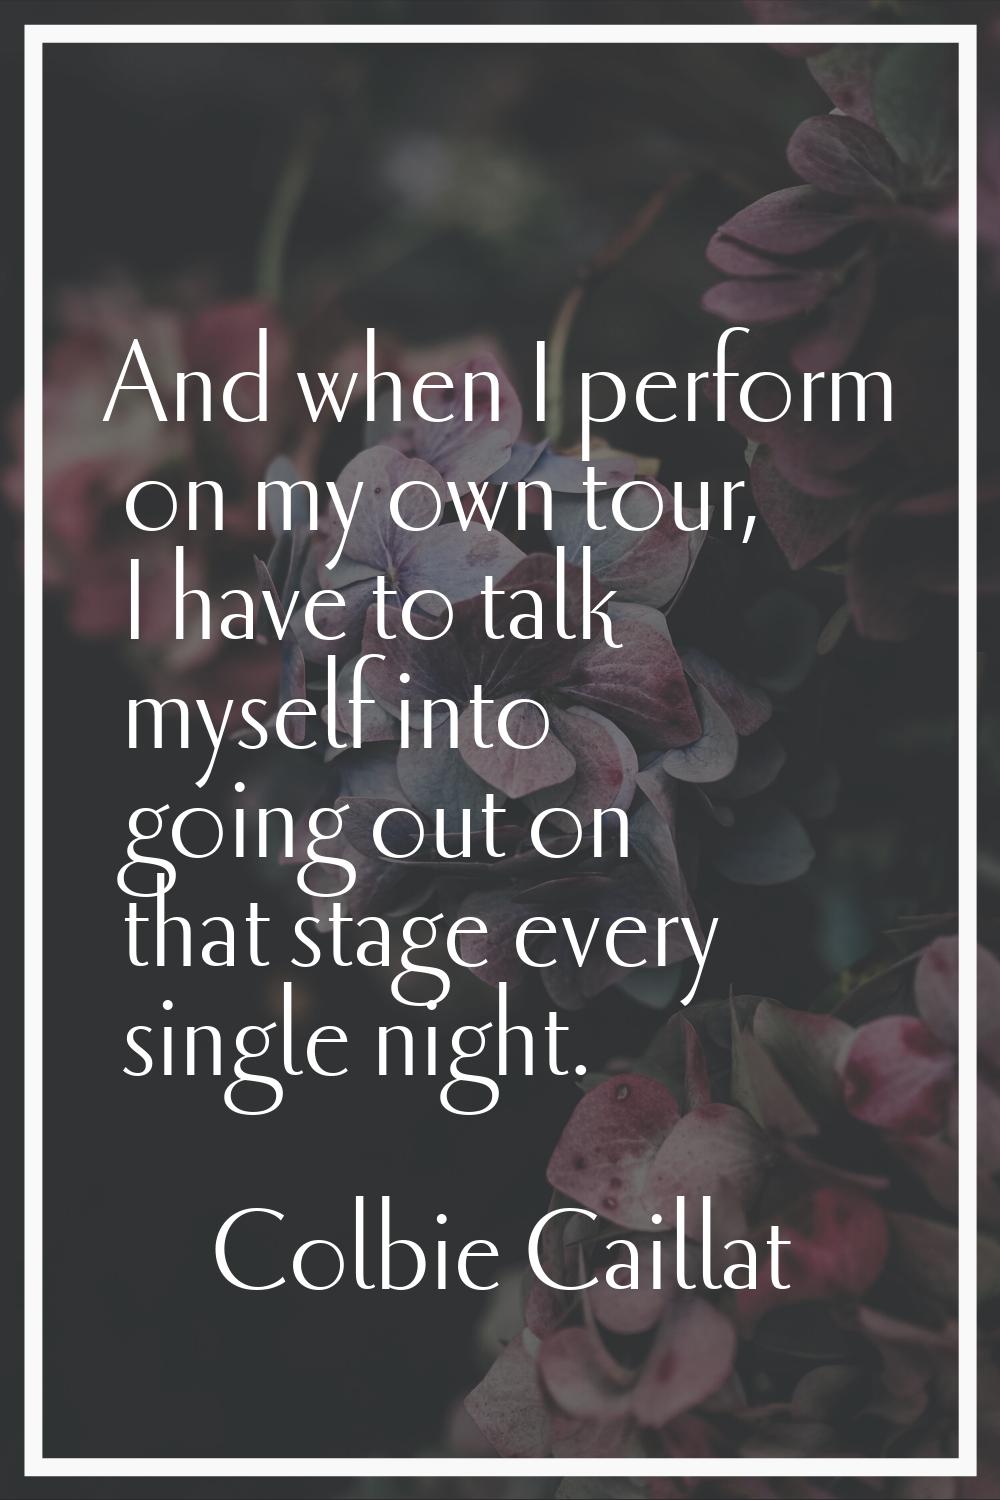 And when I perform on my own tour, I have to talk myself into going out on that stage every single 